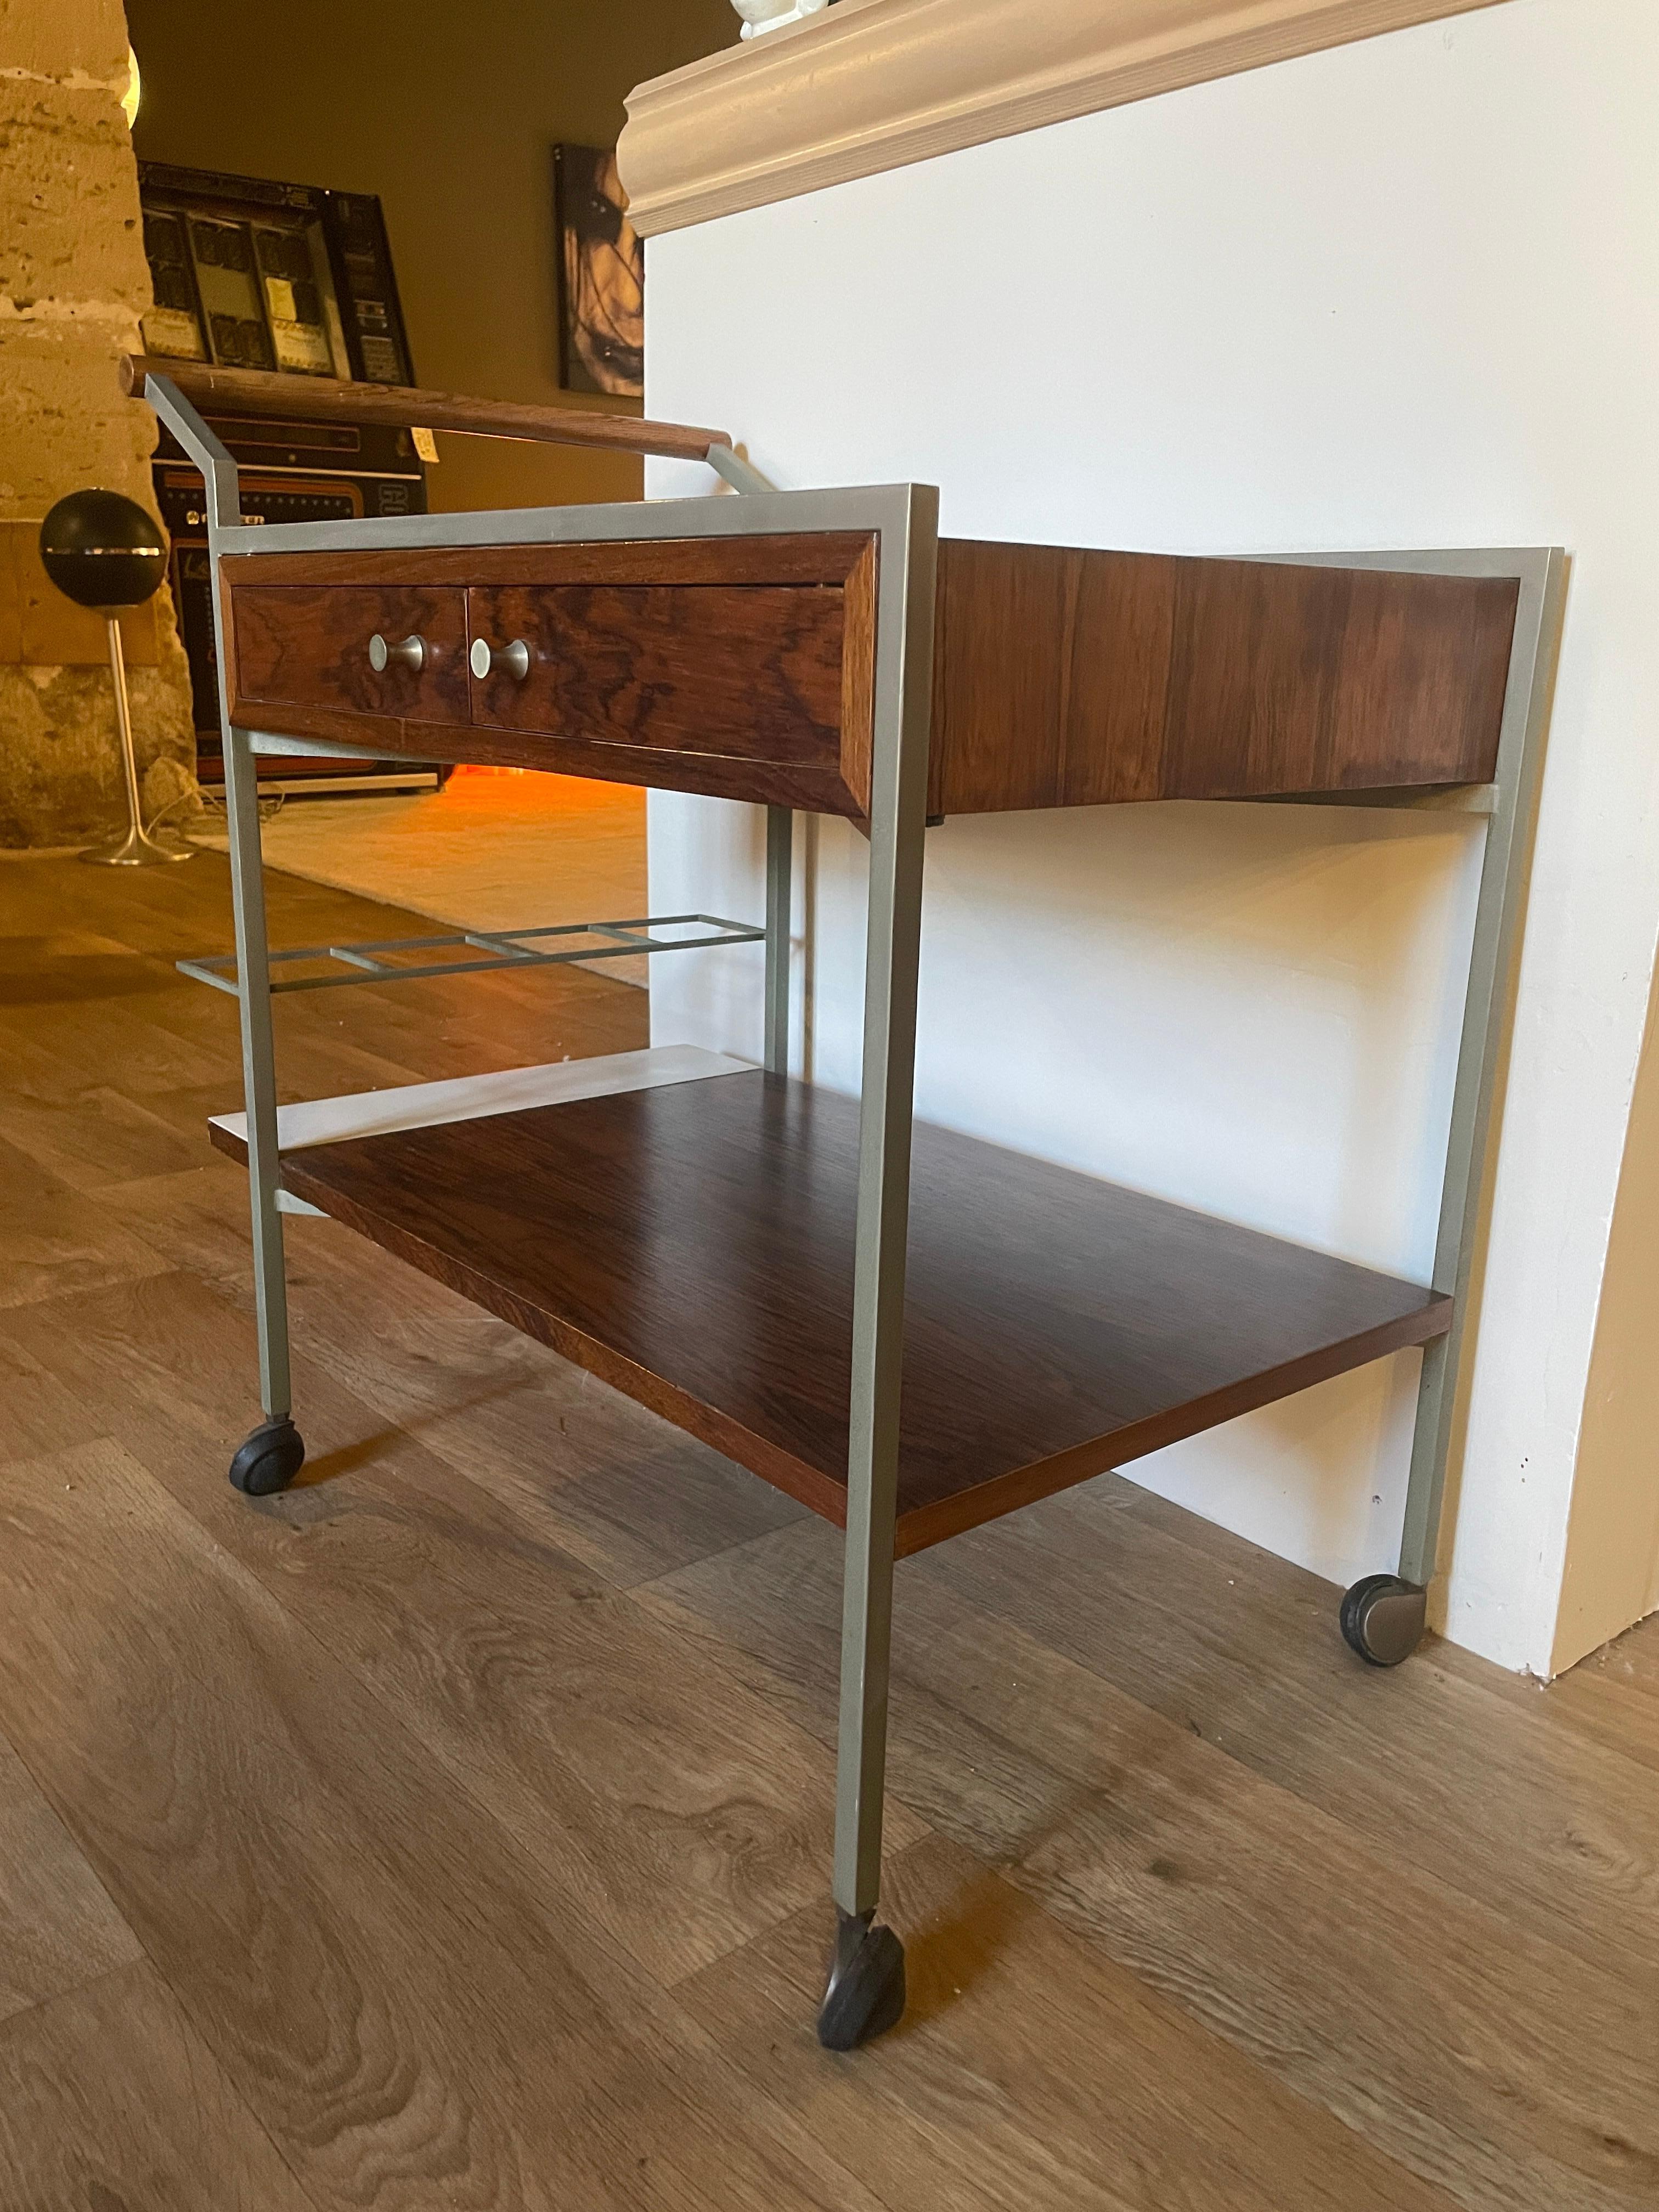 A medium dark walnut rolling bar cart.
Serving table. Service trolley design by George Nelson. 
Table bar or cocktail.
Excellent condition.
1960s
Walnut & steel.
bauhaus modernist mid-century rizzo crespi prouvé 1960 1650.
In the style of Willy